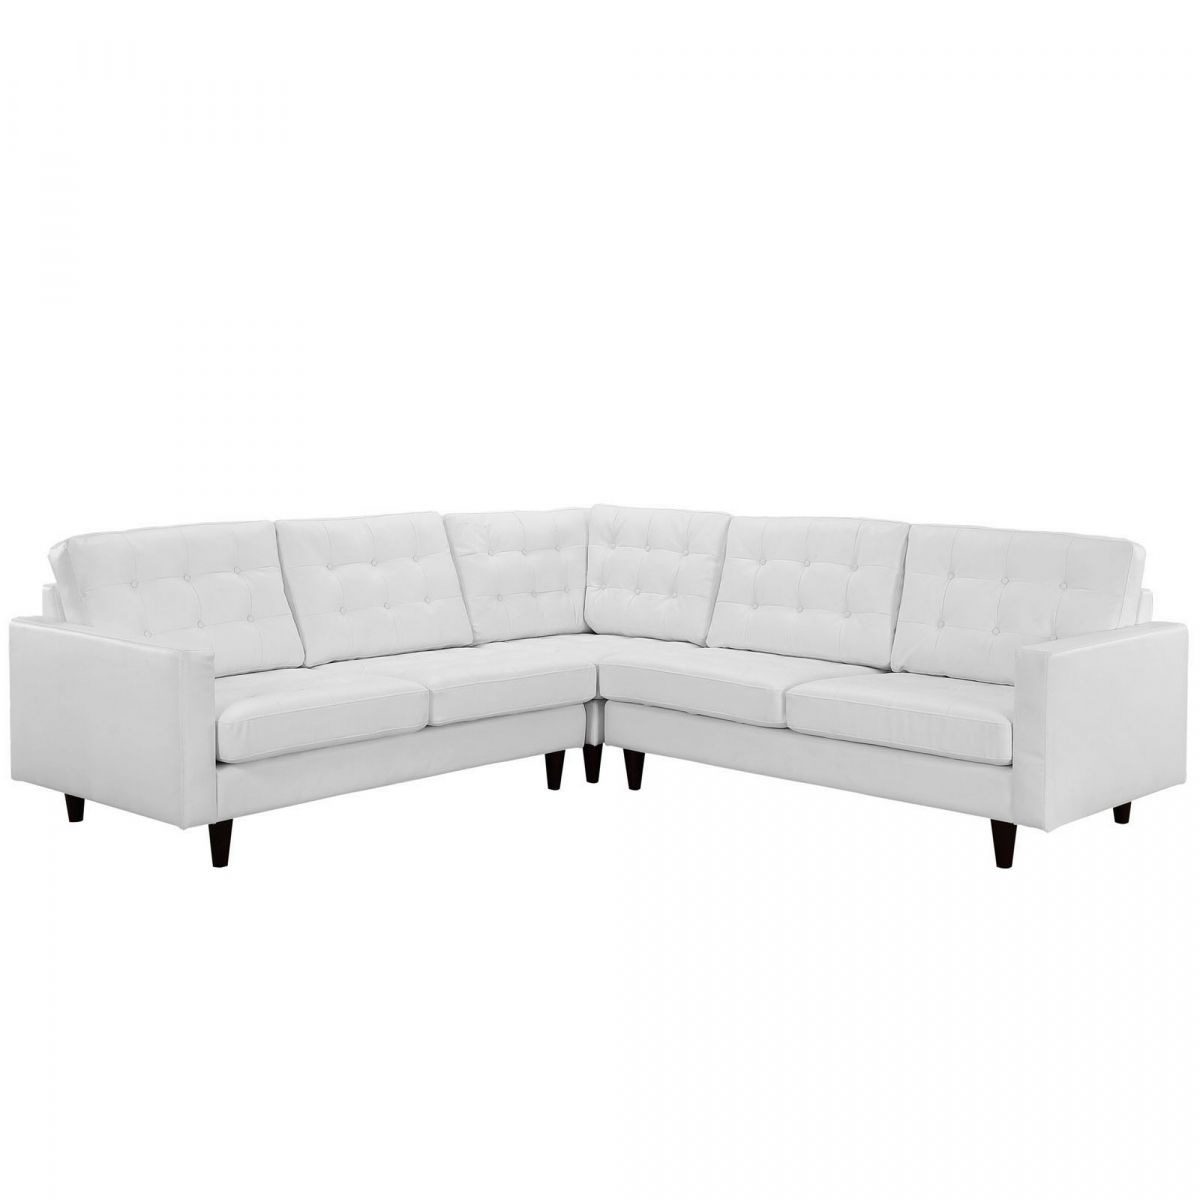 Ellen 3 Piece Leather Sectional Sofa Set – White Pertaining To 3Pc Bonded Leather Upholstered Wooden Sectional Sofas Brown (View 12 of 15)